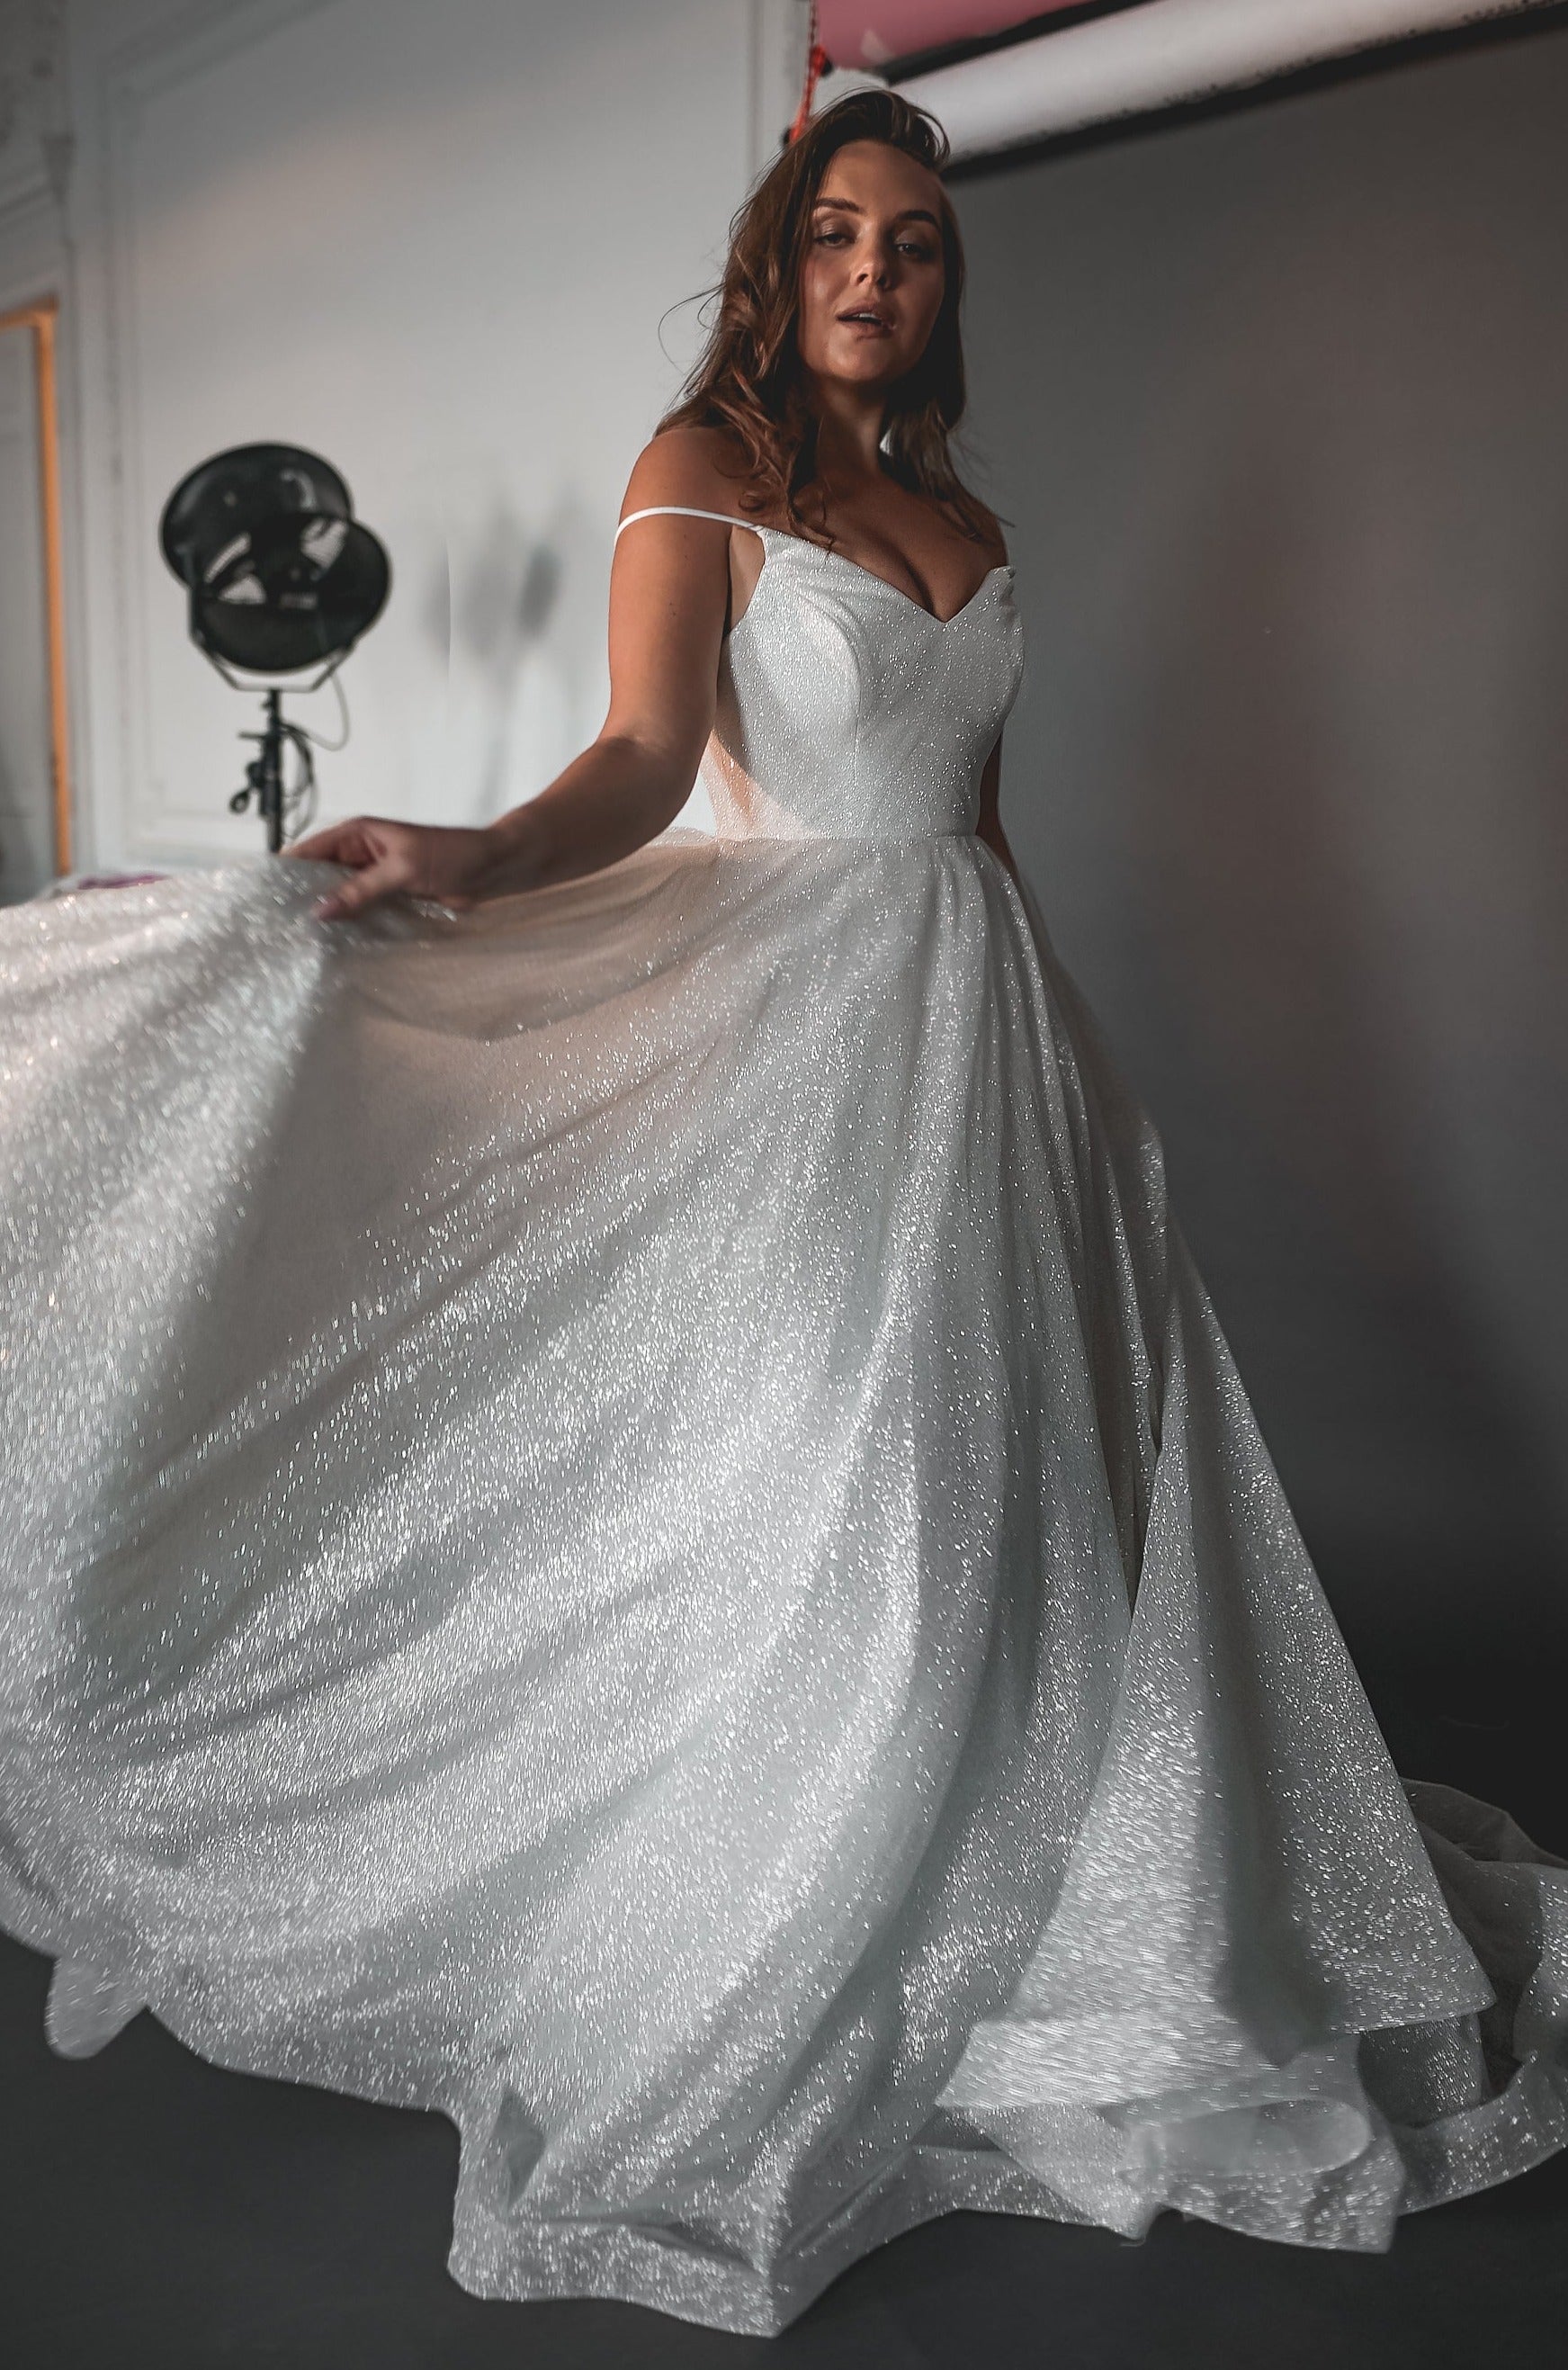 Stunning Long Sleeves, Detachable Skirt, All Over Lace Fitted Wedding Dress  Available in Plus Size 18us 26 Us -  Finland